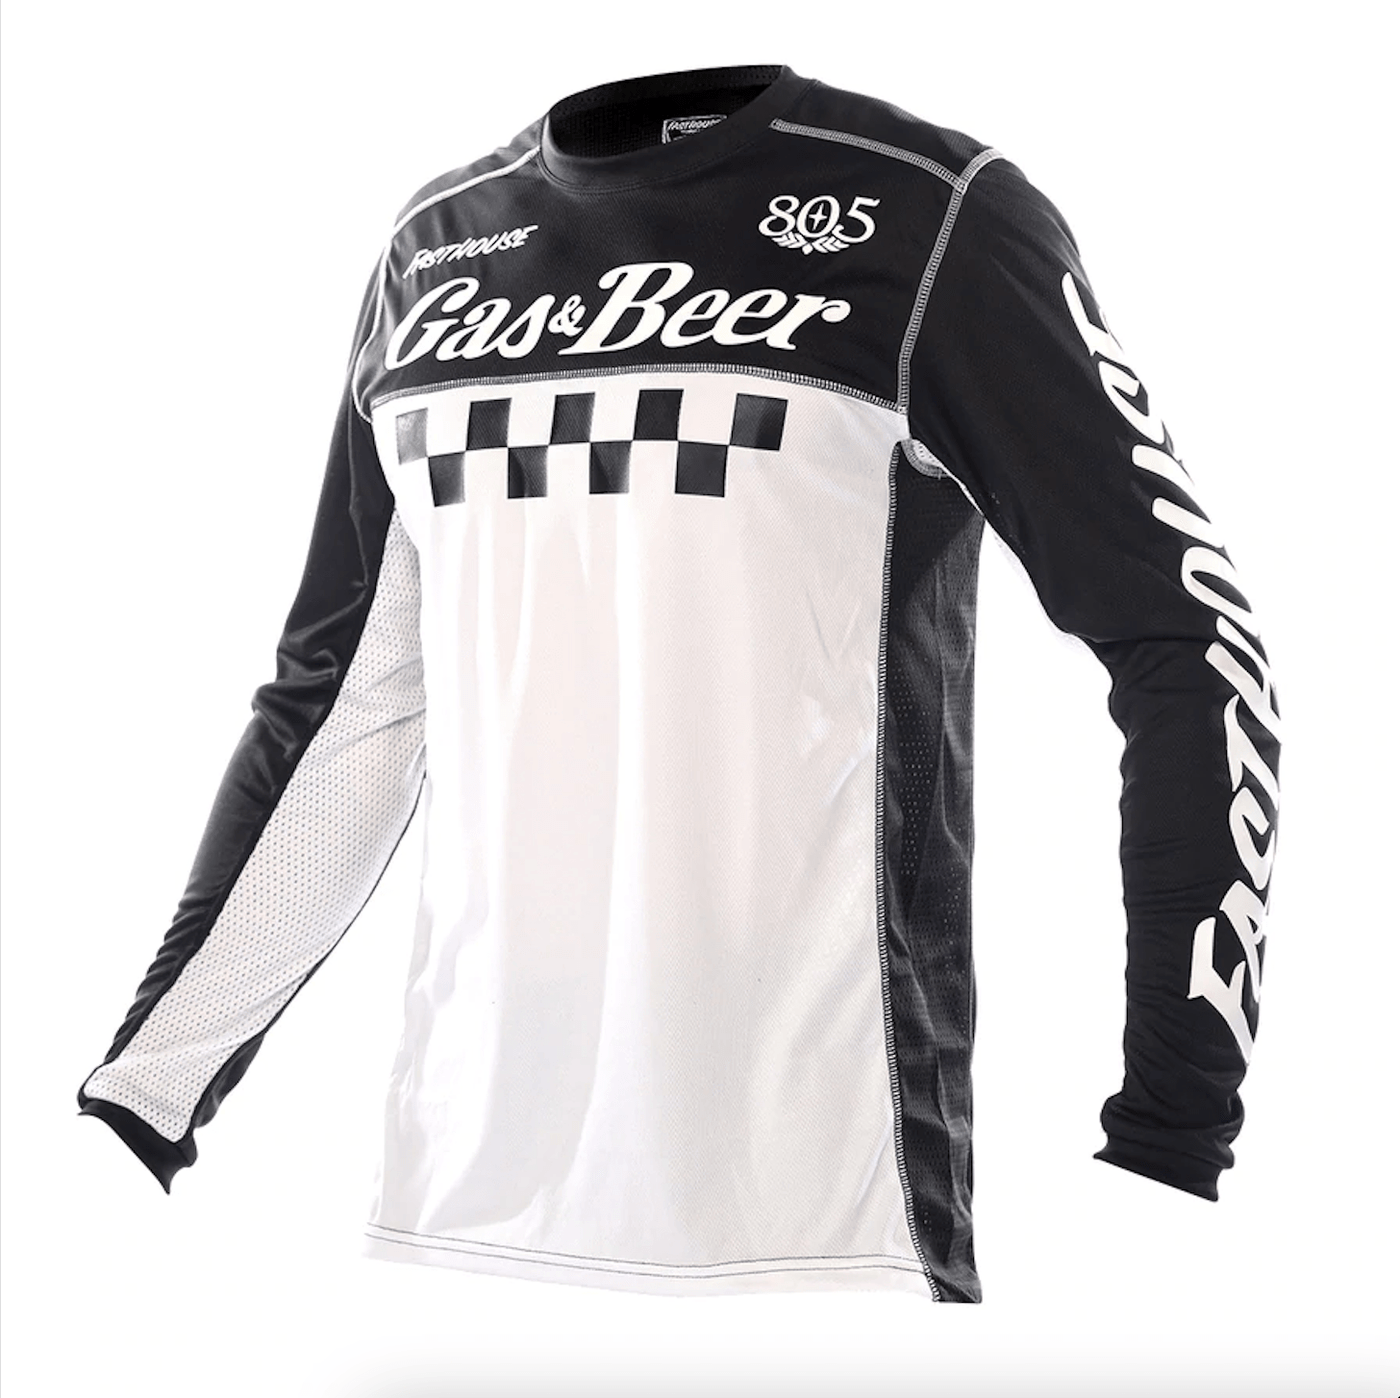 Jersey Moto Mx Fasthouse Grindhouse 805 Negro/Blanco